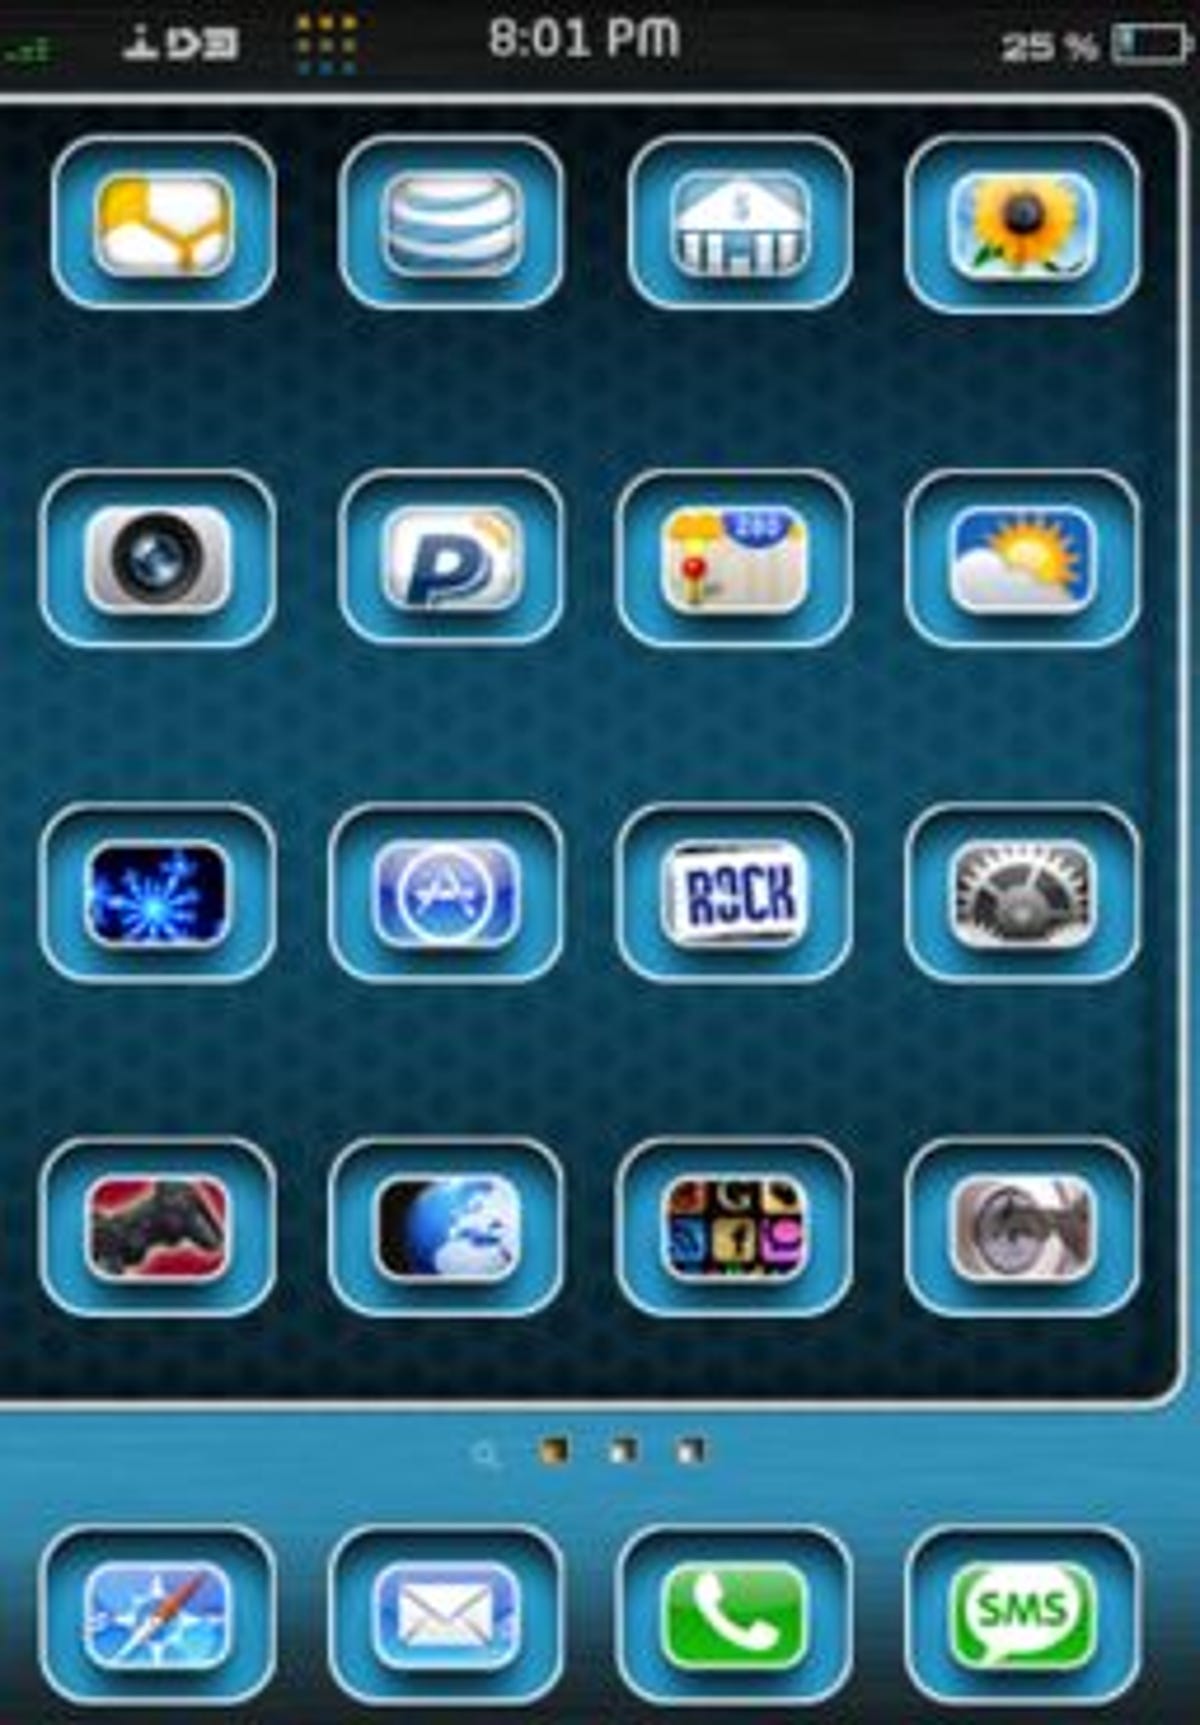 Jailbreak your iPhone and you can skin it with dazzling themes like this one.